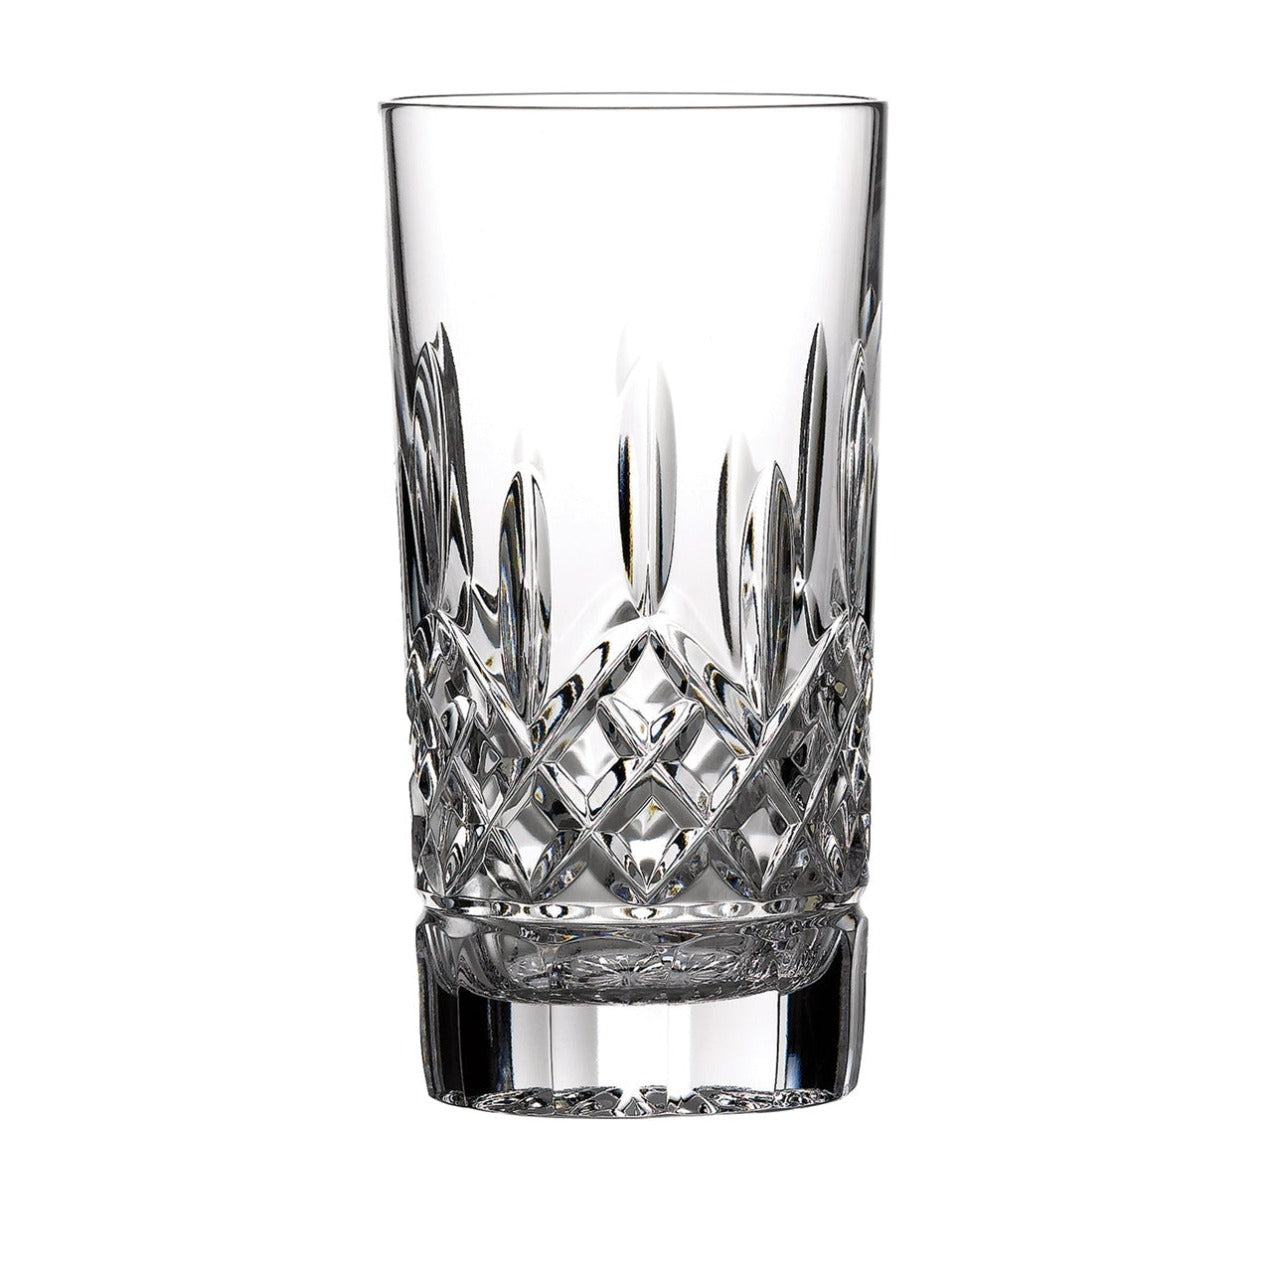 Waterford Crystal Lismore Hi-Ball 12oz - Single  The Waterford Lismore pattern is a stunning combination of brilliance and clarity. The slender design of the Lismore Hi-Ball Tumbler gives ice-cubes a musical note when they hit the sides. Ideal for serving long, cool cocktails and mixed drinks, the dramatic diamond and wedge cuts of the traditional Lismore pattern refract light with stunning radiance.